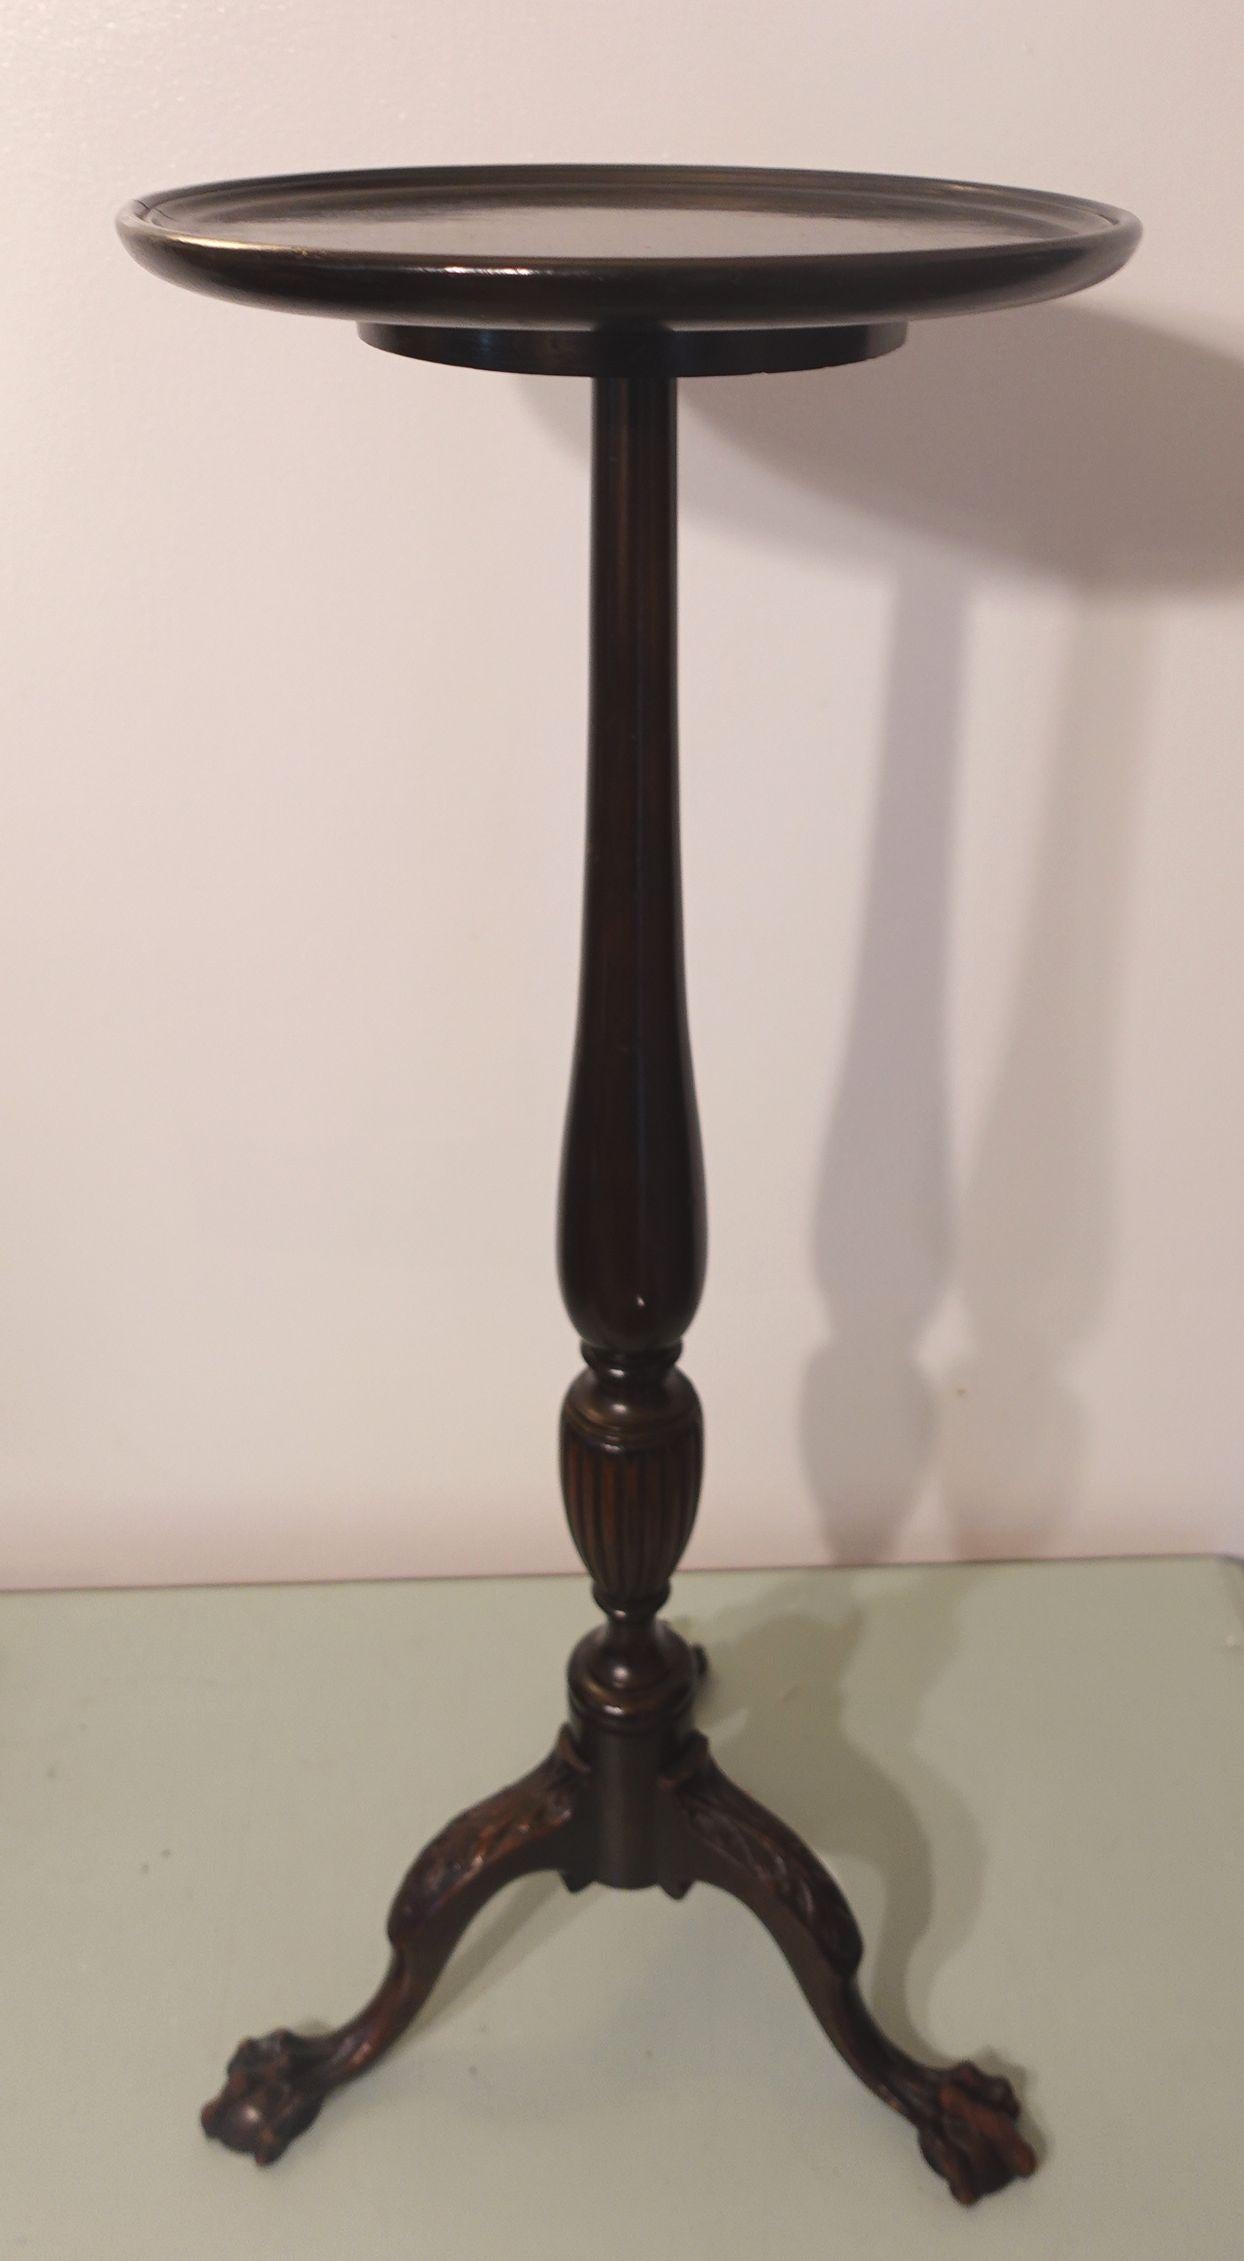 English Queen Anne-style mahogany round stand on a turned pedestal base supported by three cabriole legs with carved acanthus leaf feet. Measures: Height: 32